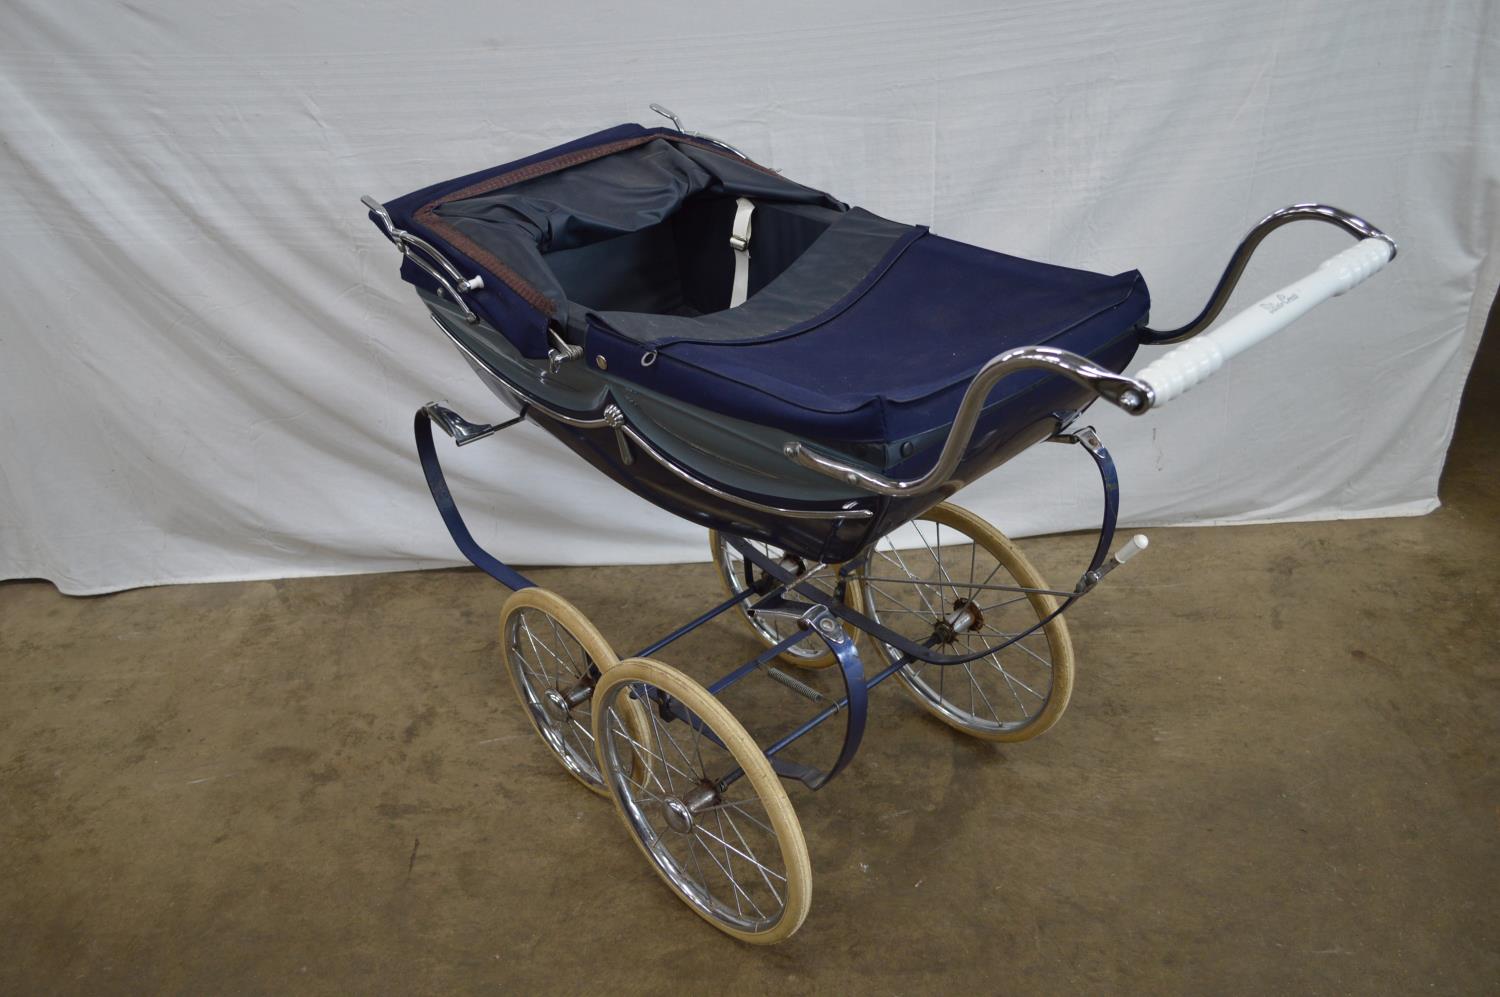 Silver Cross dolls pram in blue livery - 90cm x 77.5cm tall Please note descriptions are not - Image 2 of 5